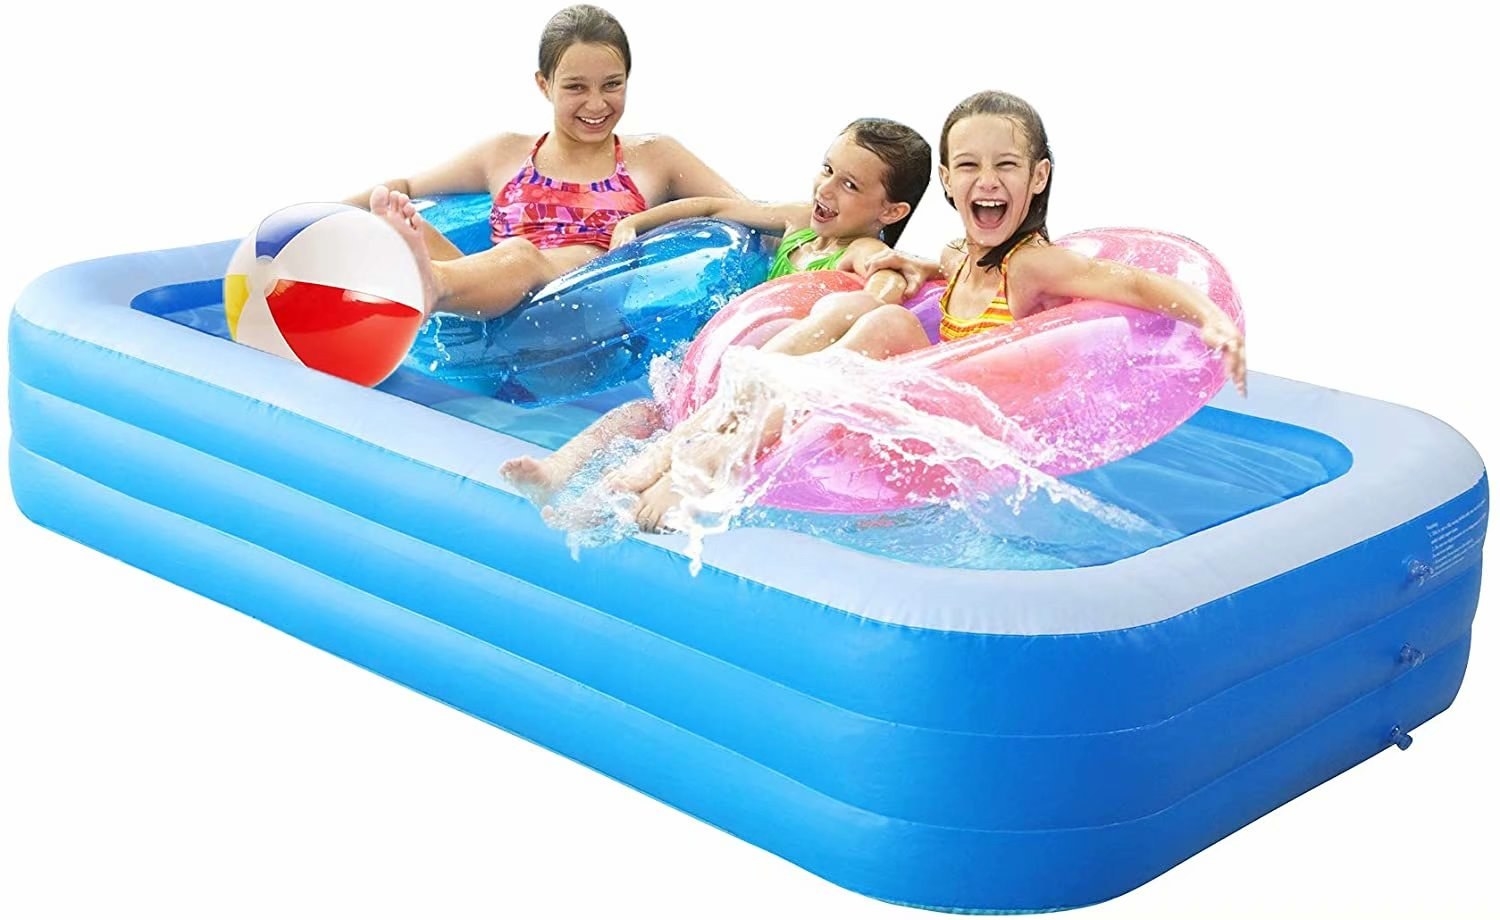 three child models playing in a blue rectangular inflatable pool 